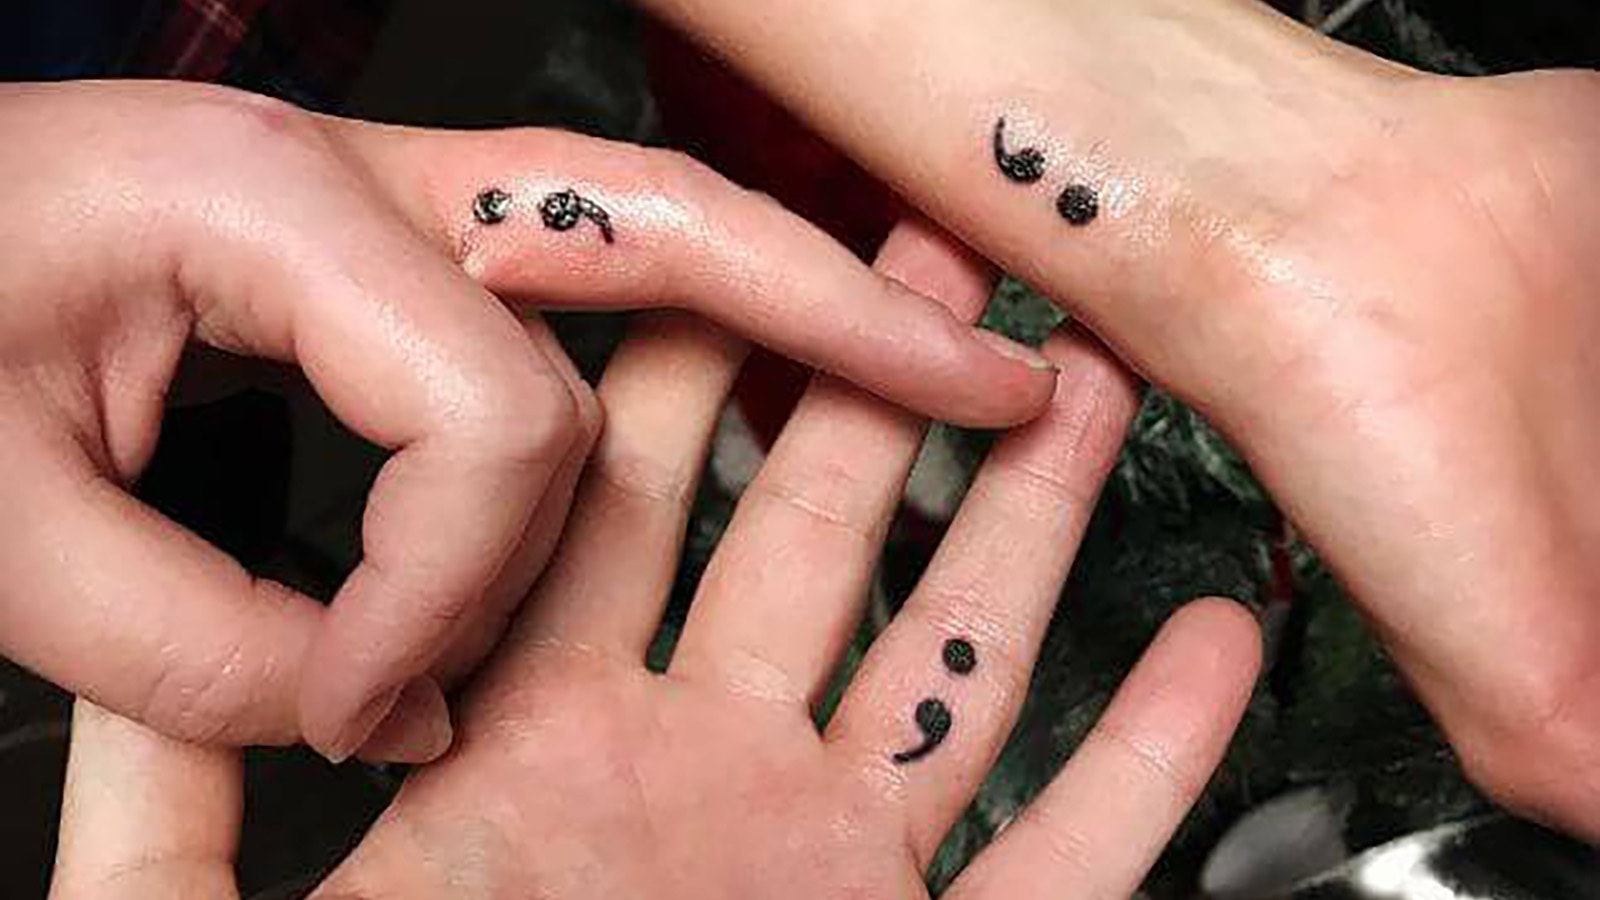 The semicolon signifies a change of direction in a sentence, but not its ending. That's a powerful metaphor for suicide.